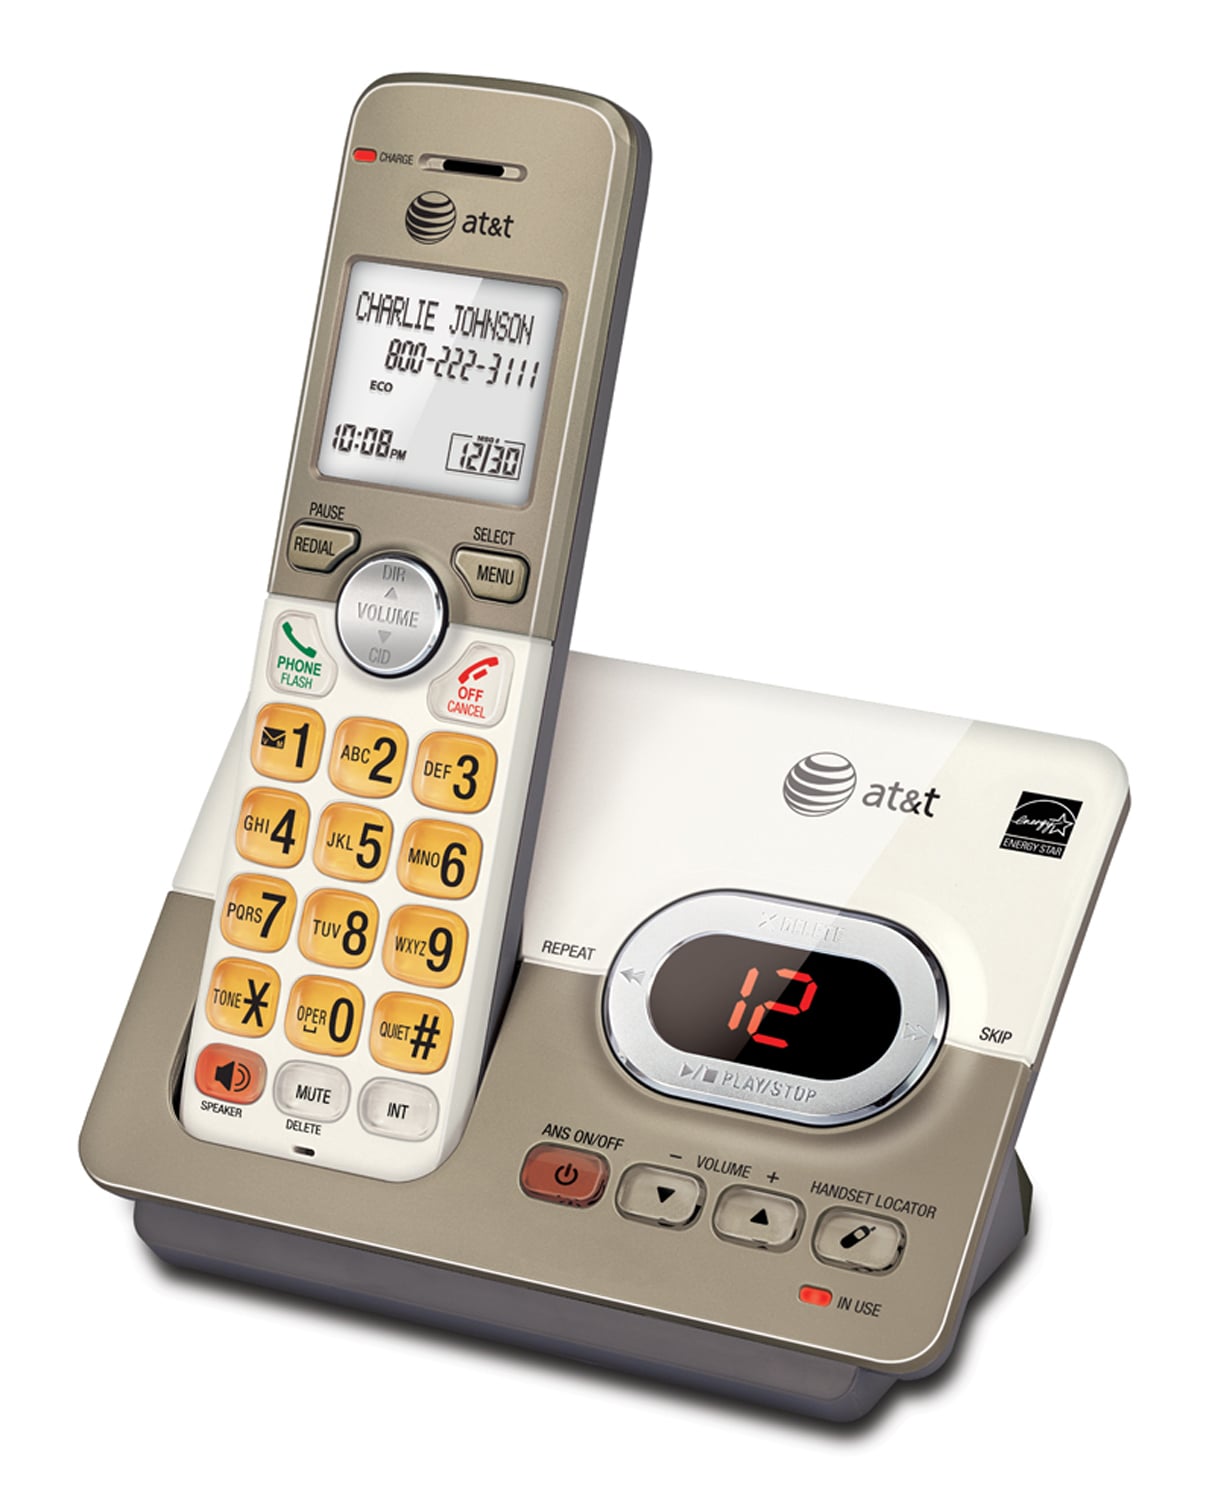 Cordless phone system with caller ID/call waiting - view 2